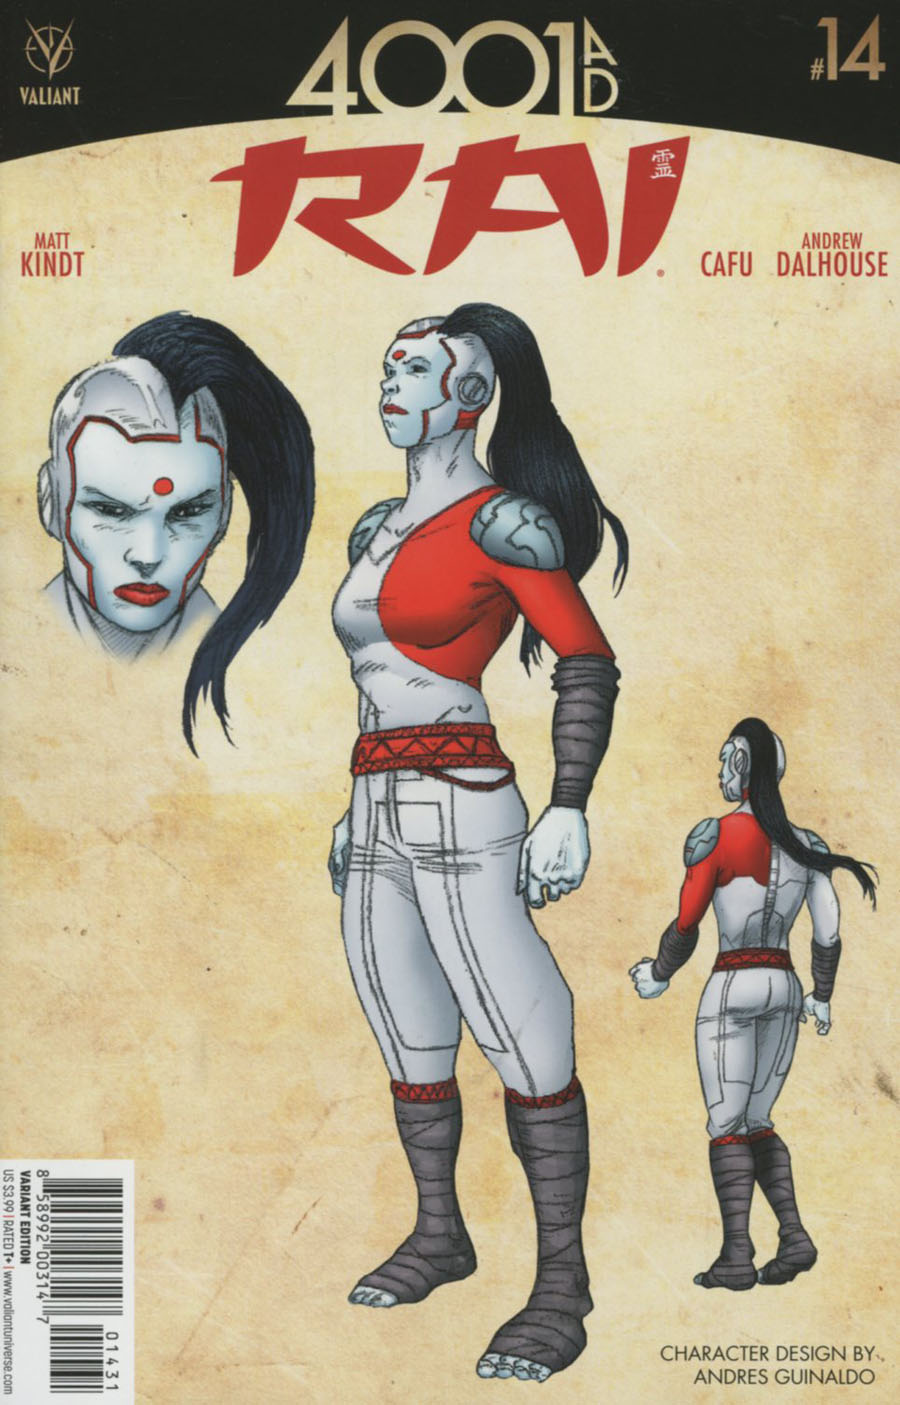 Rai Vol 2 #14 Cover C Incentive Andres Guinaldo Character Design Variant Cover (4001 AD Tie-In)